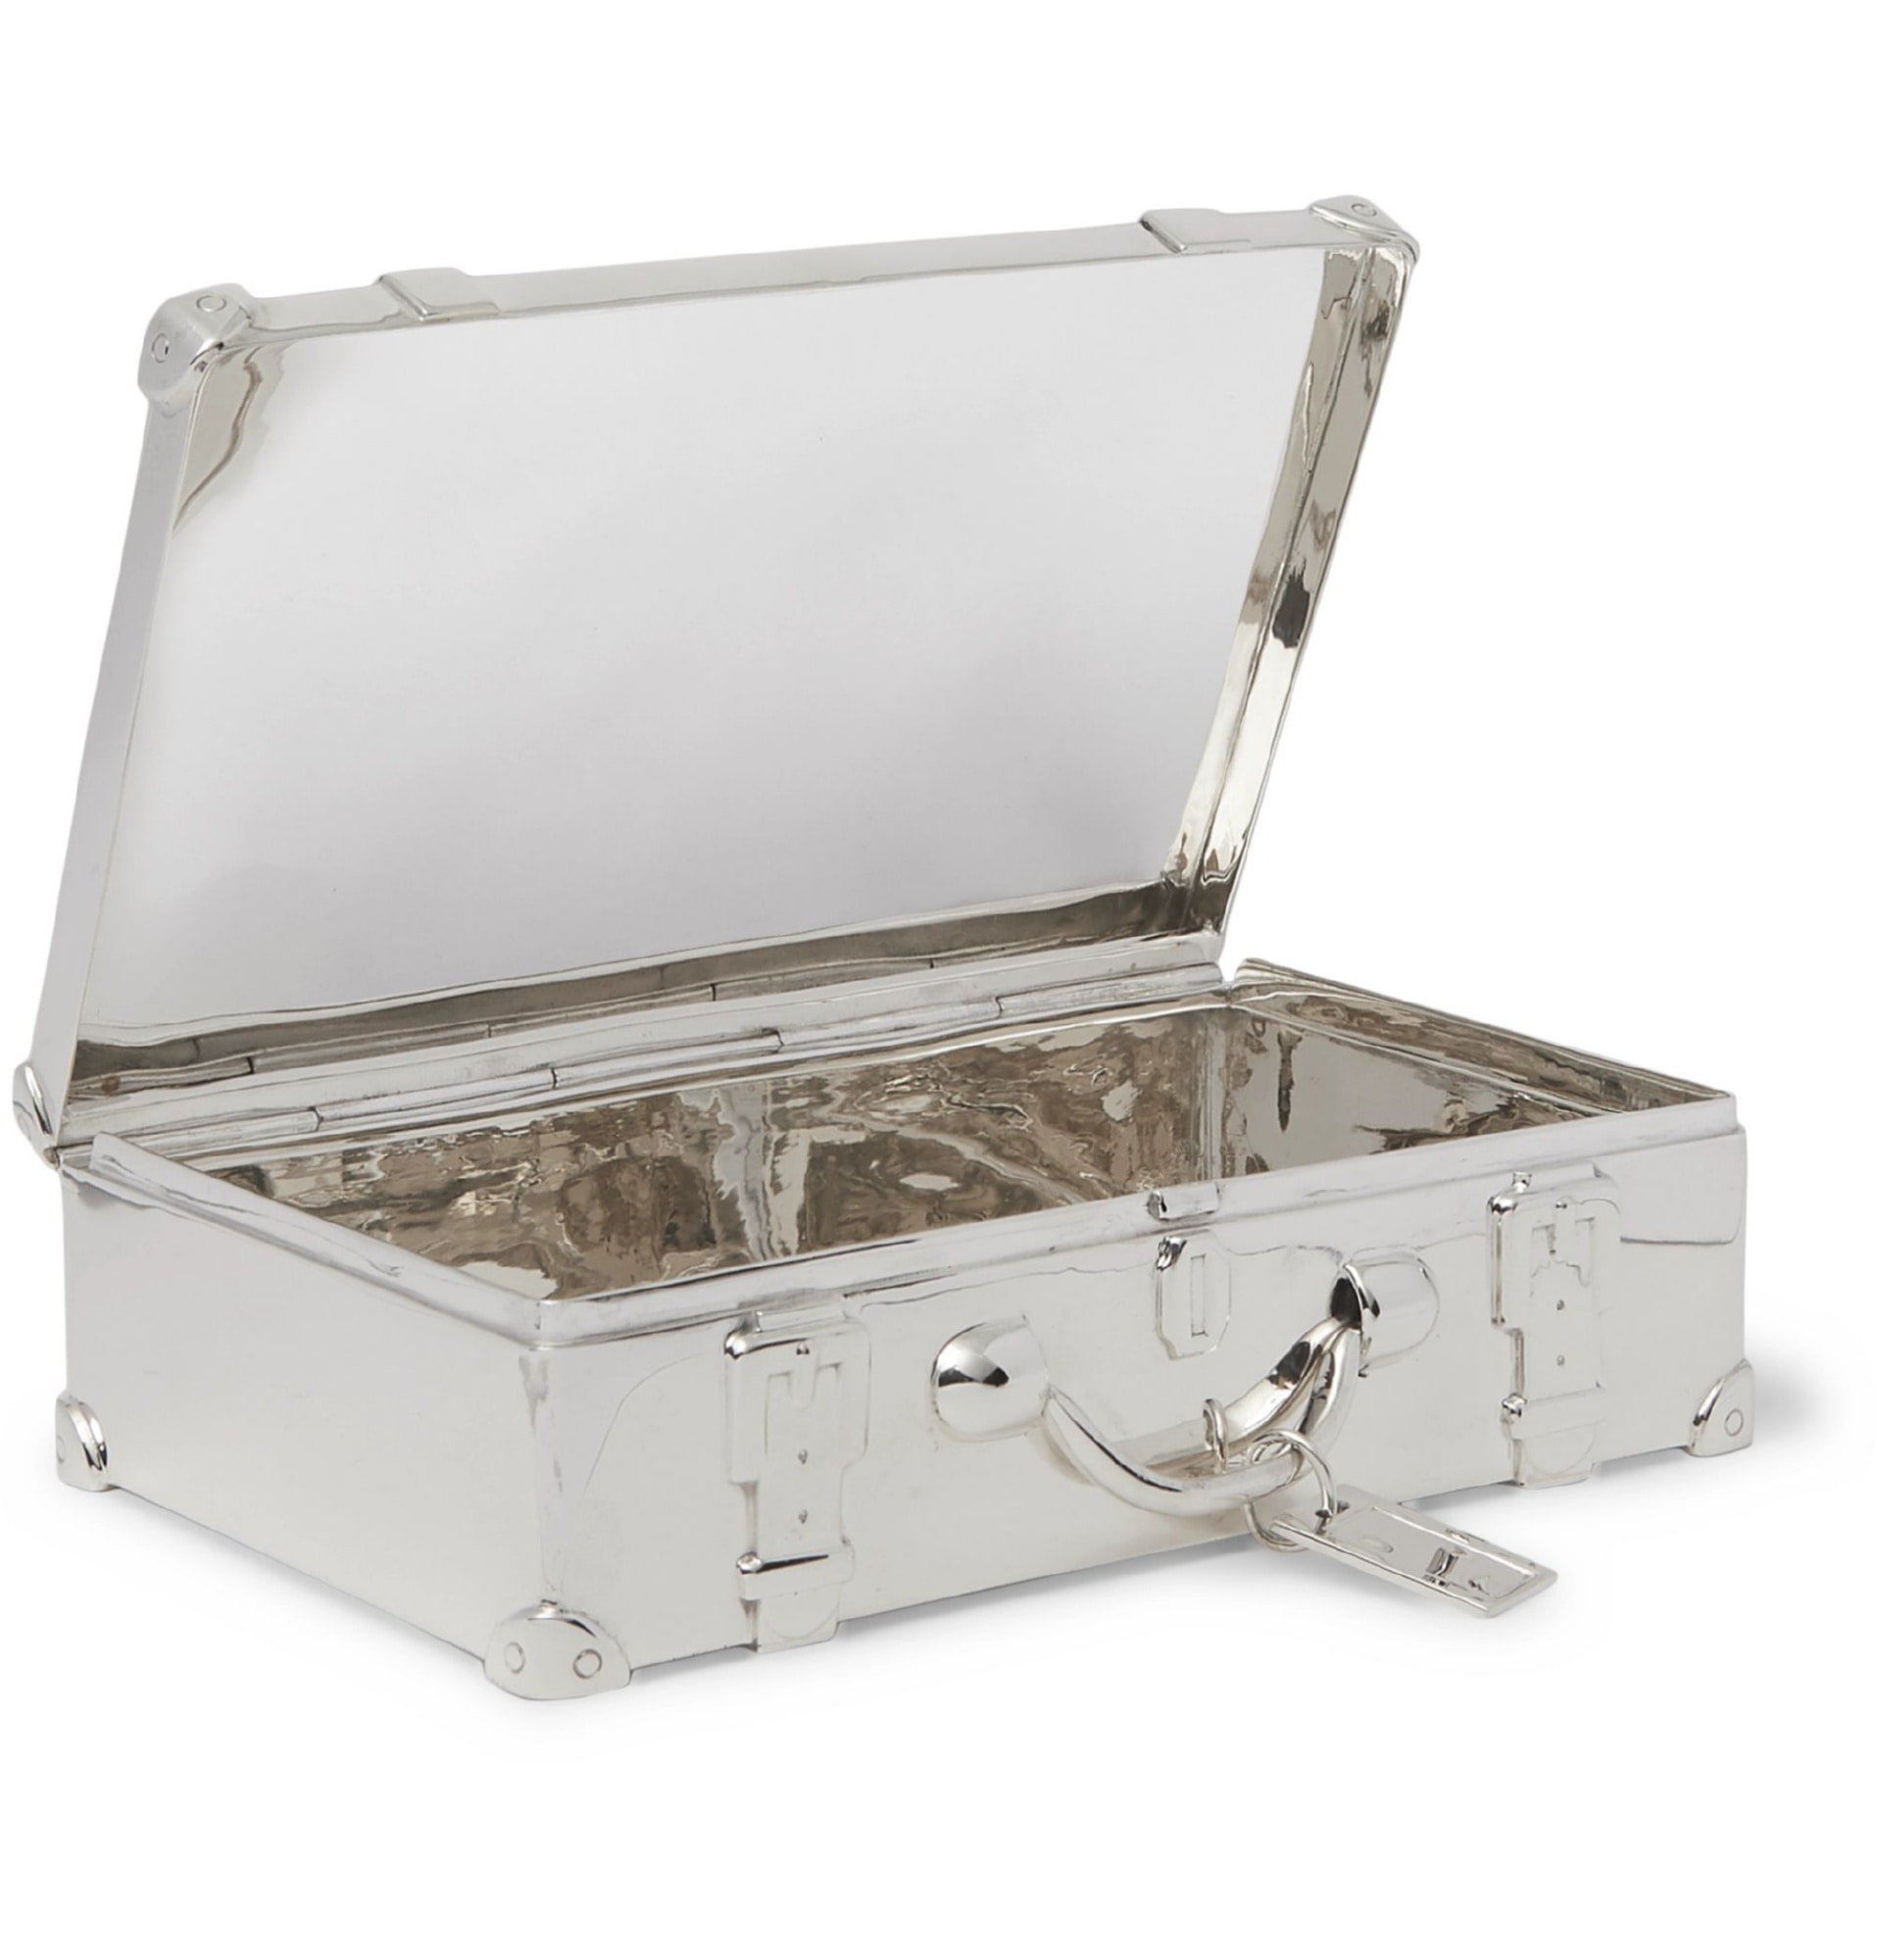 suitcase-sterling-silver-trinket-box-6499664598522241